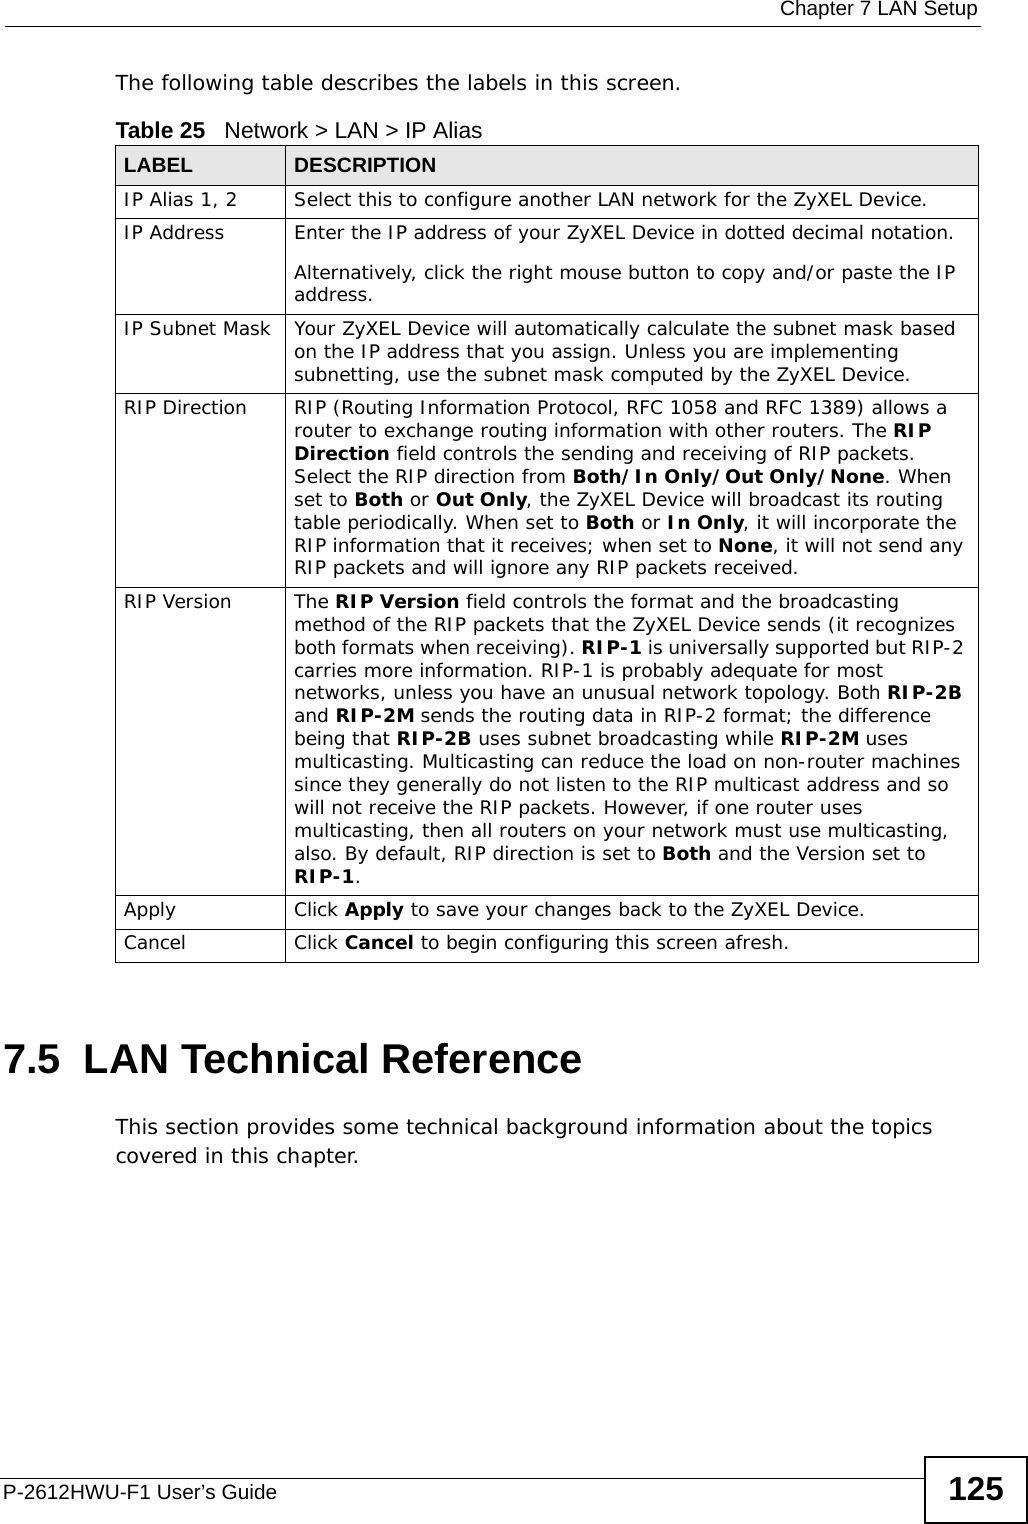  Chapter 7 LAN SetupP-2612HWU-F1 User’s Guide 125The following table describes the labels in this screen. 7.5  LAN Technical ReferenceThis section provides some technical background information about the topics covered in this chapter.Table 25   Network &gt; LAN &gt; IP Alias  LABEL DESCRIPTIONIP Alias 1, 2 Select this to configure another LAN network for the ZyXEL Device.IP Address Enter the IP address of your ZyXEL Device in dotted decimal notation. Alternatively, click the right mouse button to copy and/or paste the IP address.IP Subnet Mask Your ZyXEL Device will automatically calculate the subnet mask based on the IP address that you assign. Unless you are implementing subnetting, use the subnet mask computed by the ZyXEL Device.RIP Direction RIP (Routing Information Protocol, RFC 1058 and RFC 1389) allows a router to exchange routing information with other routers. The RIP Direction field controls the sending and receiving of RIP packets. Select the RIP direction from Both/In Only/Out Only/None. When set to Both or Out Only, the ZyXEL Device will broadcast its routing table periodically. When set to Both or In Only, it will incorporate the RIP information that it receives; when set to None, it will not send any RIP packets and will ignore any RIP packets received.RIP Version The RIP Version field controls the format and the broadcasting method of the RIP packets that the ZyXEL Device sends (it recognizes both formats when receiving). RIP-1 is universally supported but RIP-2 carries more information. RIP-1 is probably adequate for most networks, unless you have an unusual network topology. Both RIP-2B and RIP-2M sends the routing data in RIP-2 format; the difference being that RIP-2B uses subnet broadcasting while RIP-2M uses multicasting. Multicasting can reduce the load on non-router machines since they generally do not listen to the RIP multicast address and so will not receive the RIP packets. However, if one router uses multicasting, then all routers on your network must use multicasting, also. By default, RIP direction is set to Both and the Version set to RIP-1.Apply Click Apply to save your changes back to the ZyXEL Device.Cancel Click Cancel to begin configuring this screen afresh.